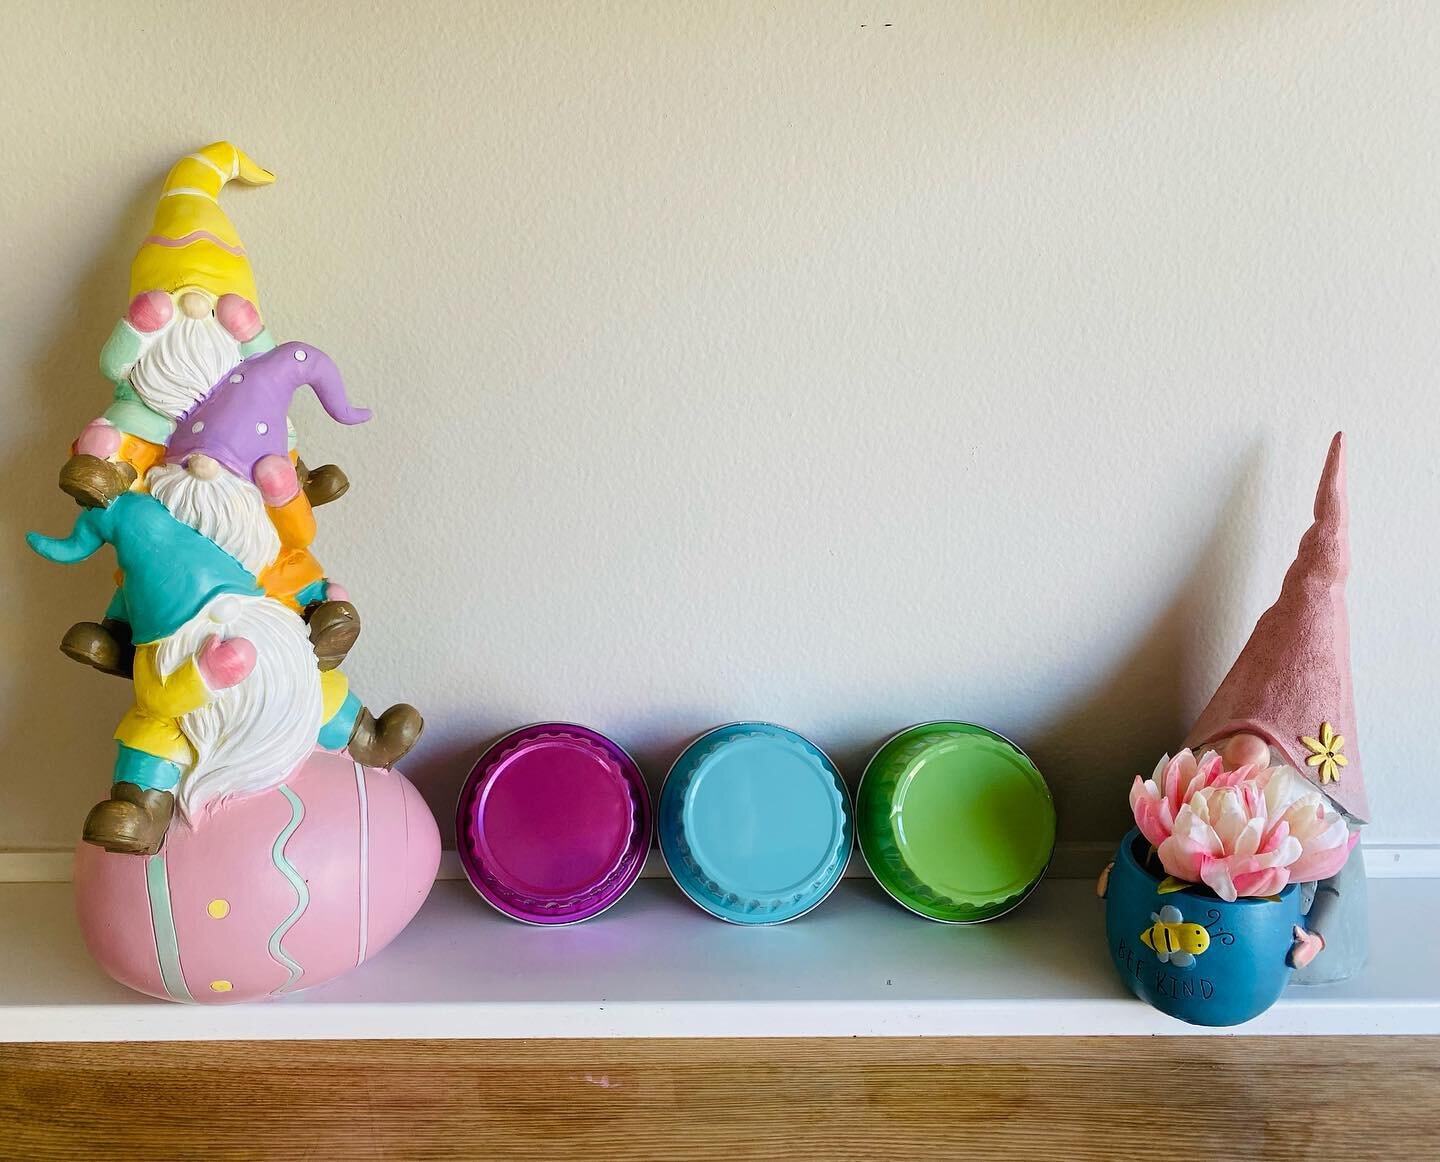 How cute are these pastel ramekins? Our desserts are the perfect addition to your Easter celebration! We are still taking orders through Friday. Come visit us at @chaikhanachai this Saturday from 10-2, or place your order online today! www.cremebru.c